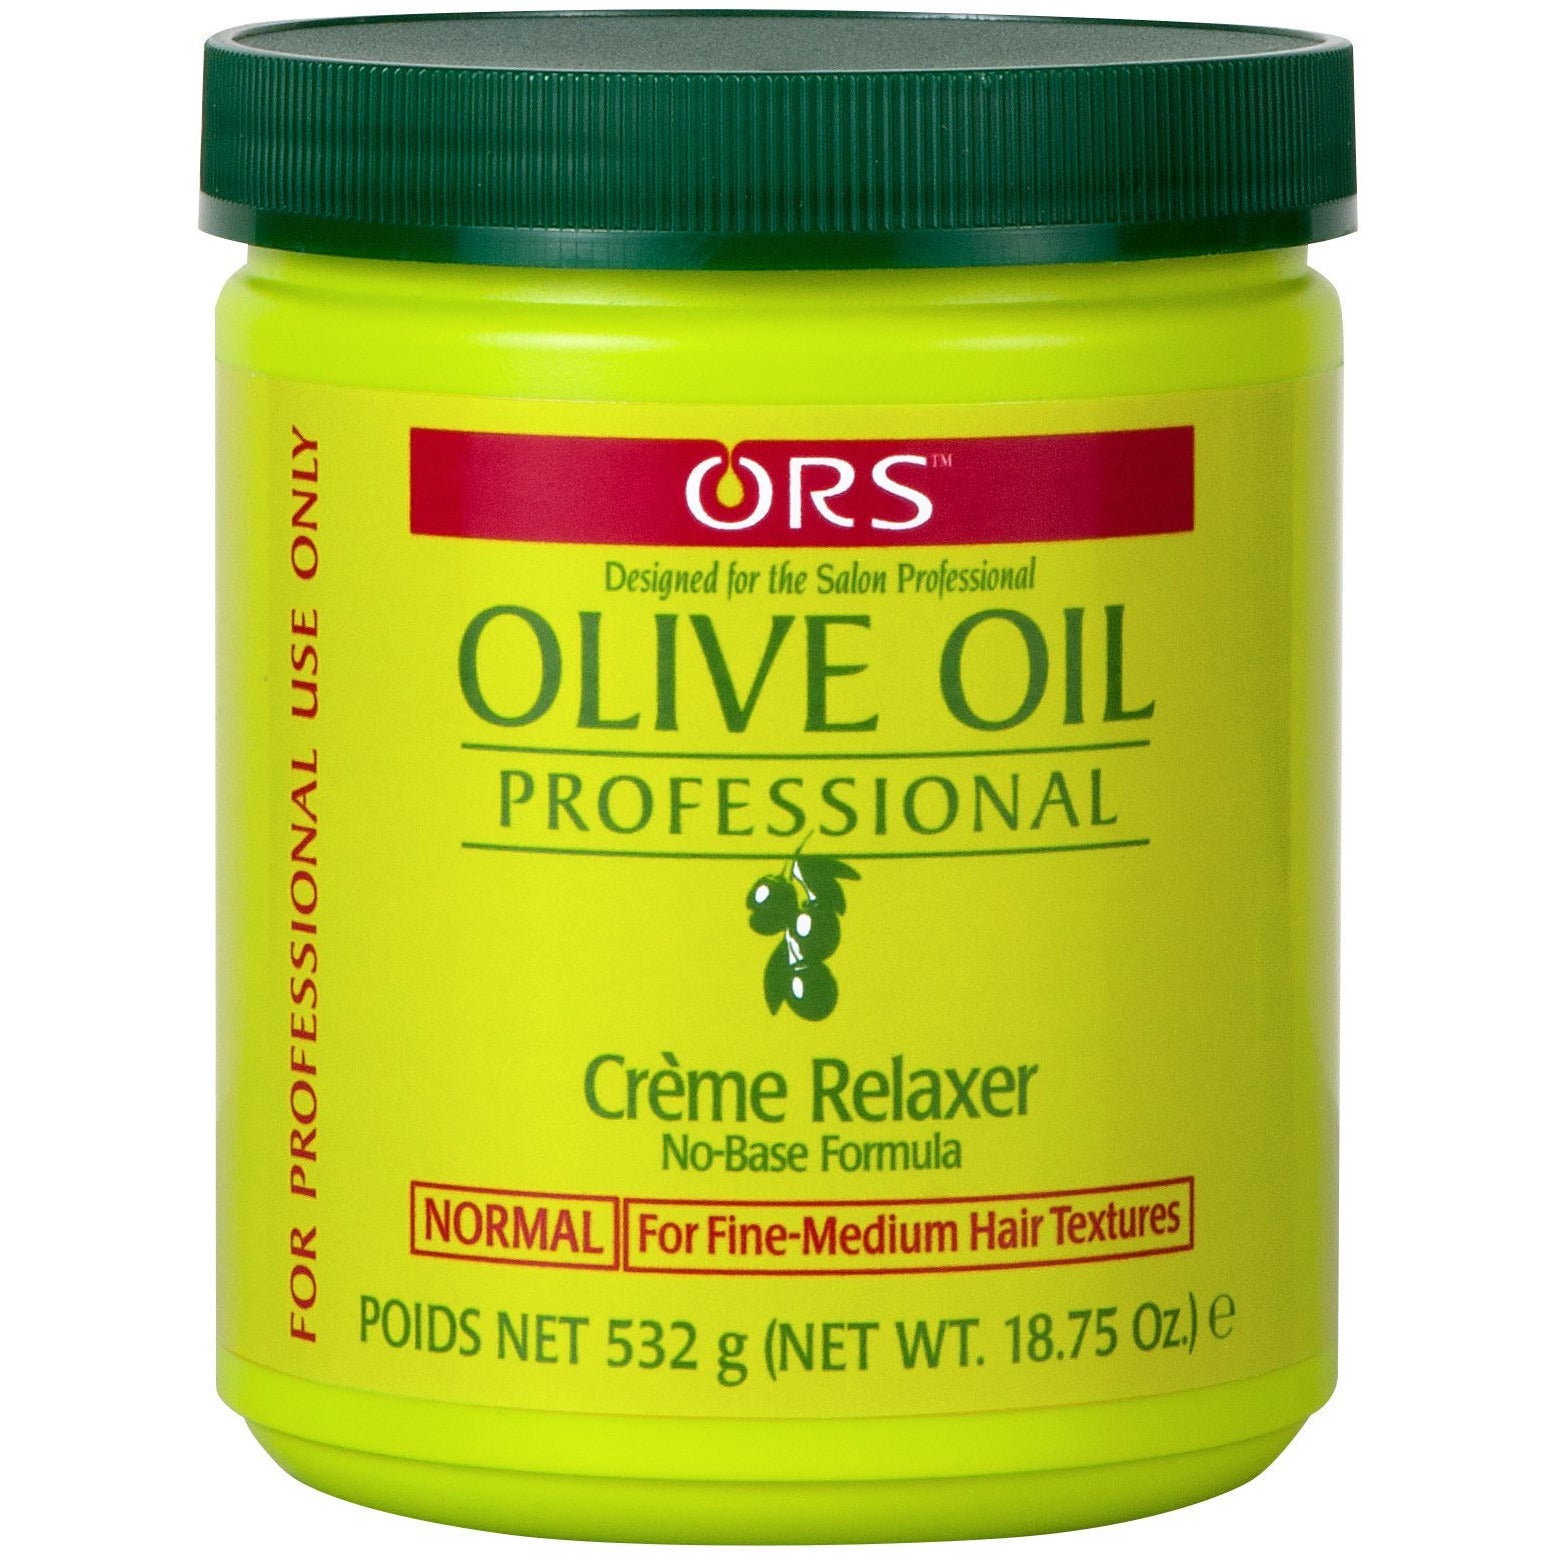 Organic Root Stimulator Olive Oil Professional Creme Relaxer Normal 18.75 Oz